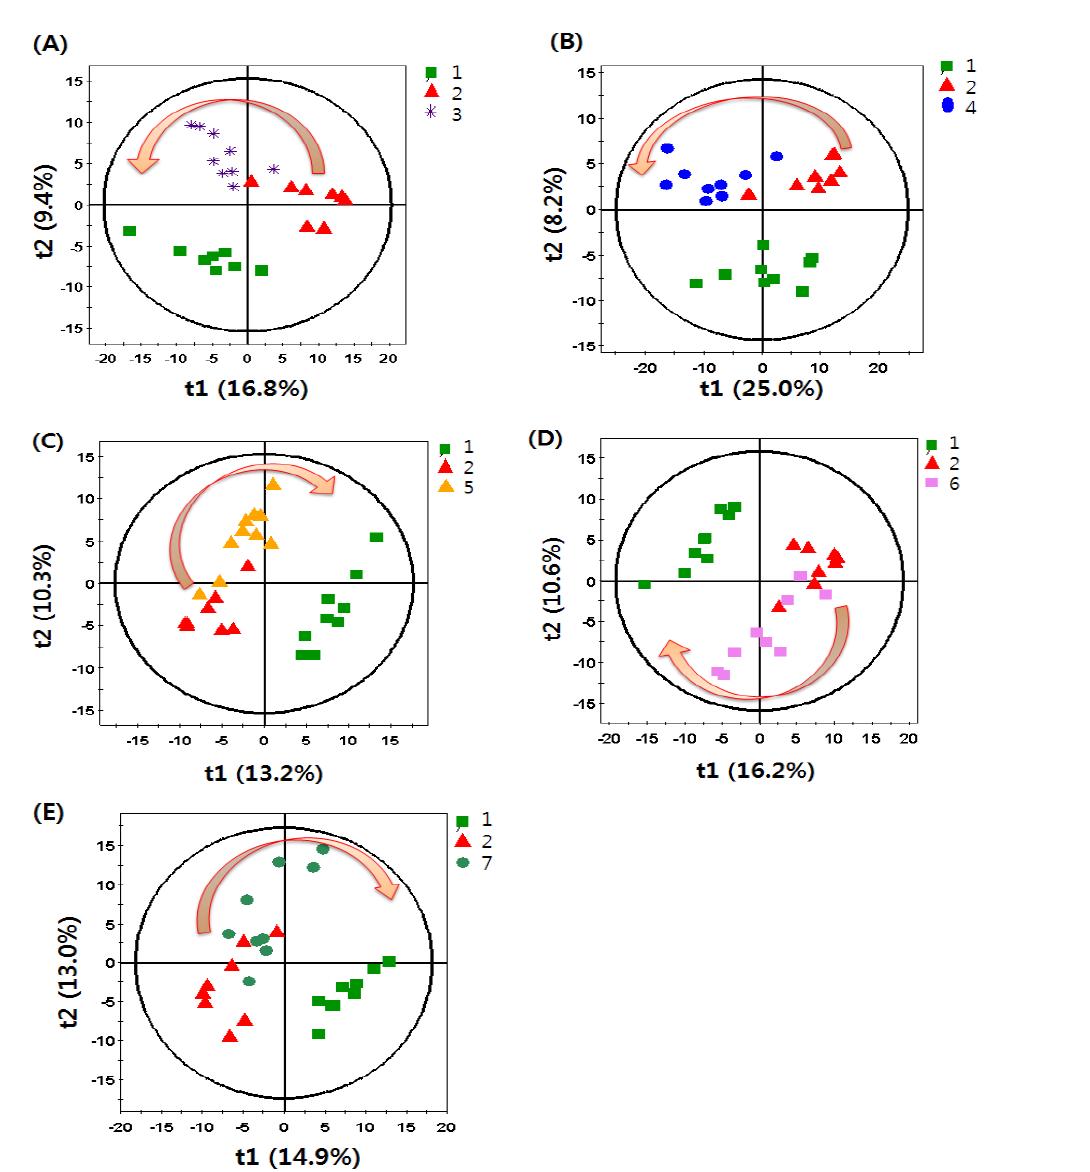 A OPLS-DA score scatter plots (A) for 1 to 3 groups, (B) for 1, 2, and 4 groups, (C) for 1, 2, and 5 groups, (D) for 1, 2, and 6 groups, and (E) for 1, 2, and 7 groups by the associated positive mode of RP-LC/MS analysis